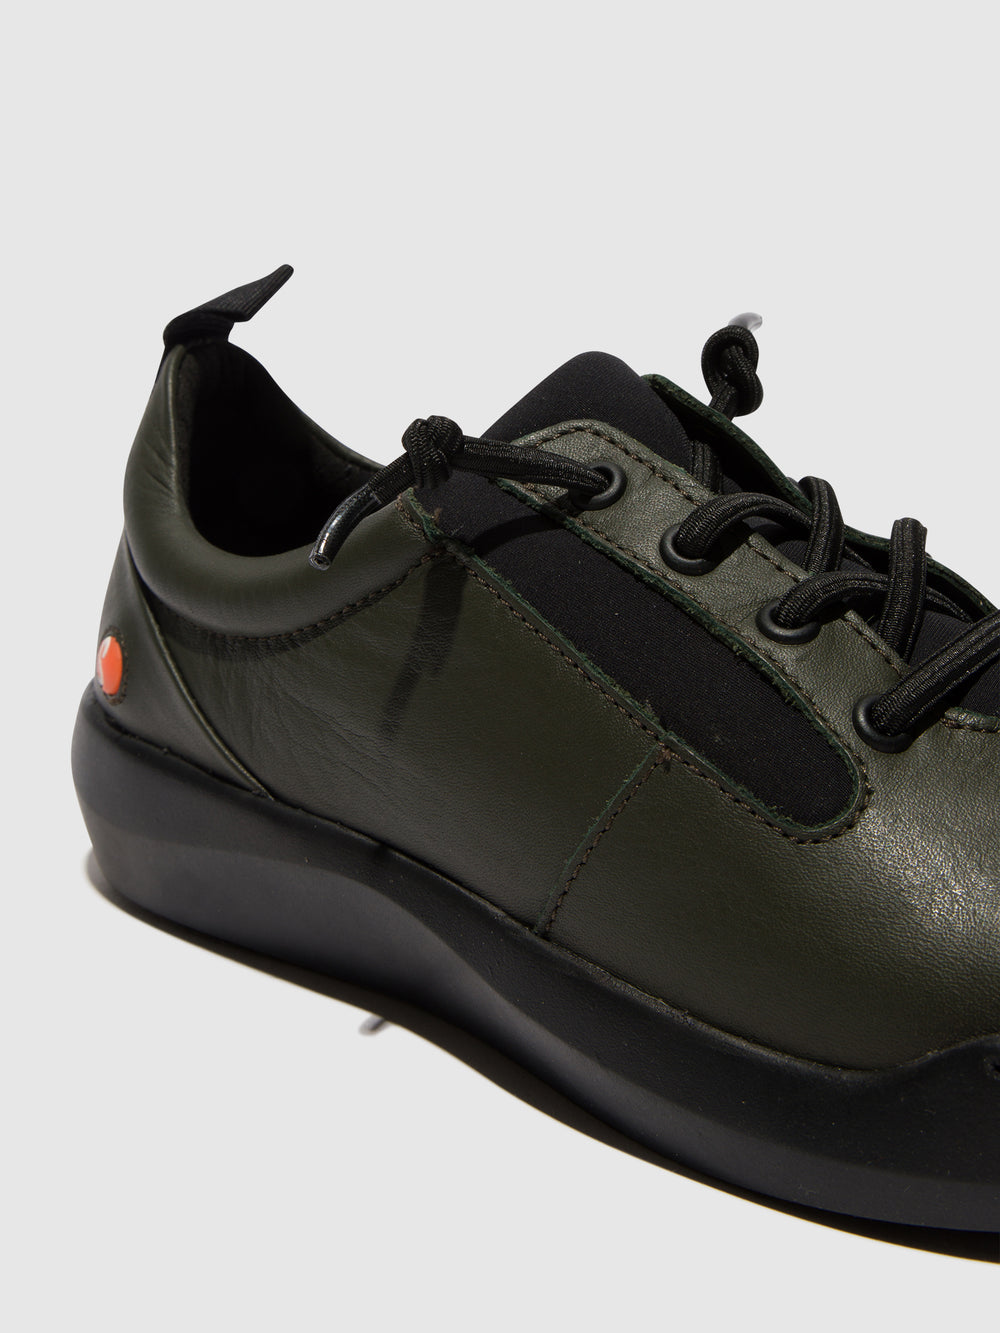 Lace-up Trainers BANN730SOF MILITARY W/BLACK NEOPRENE